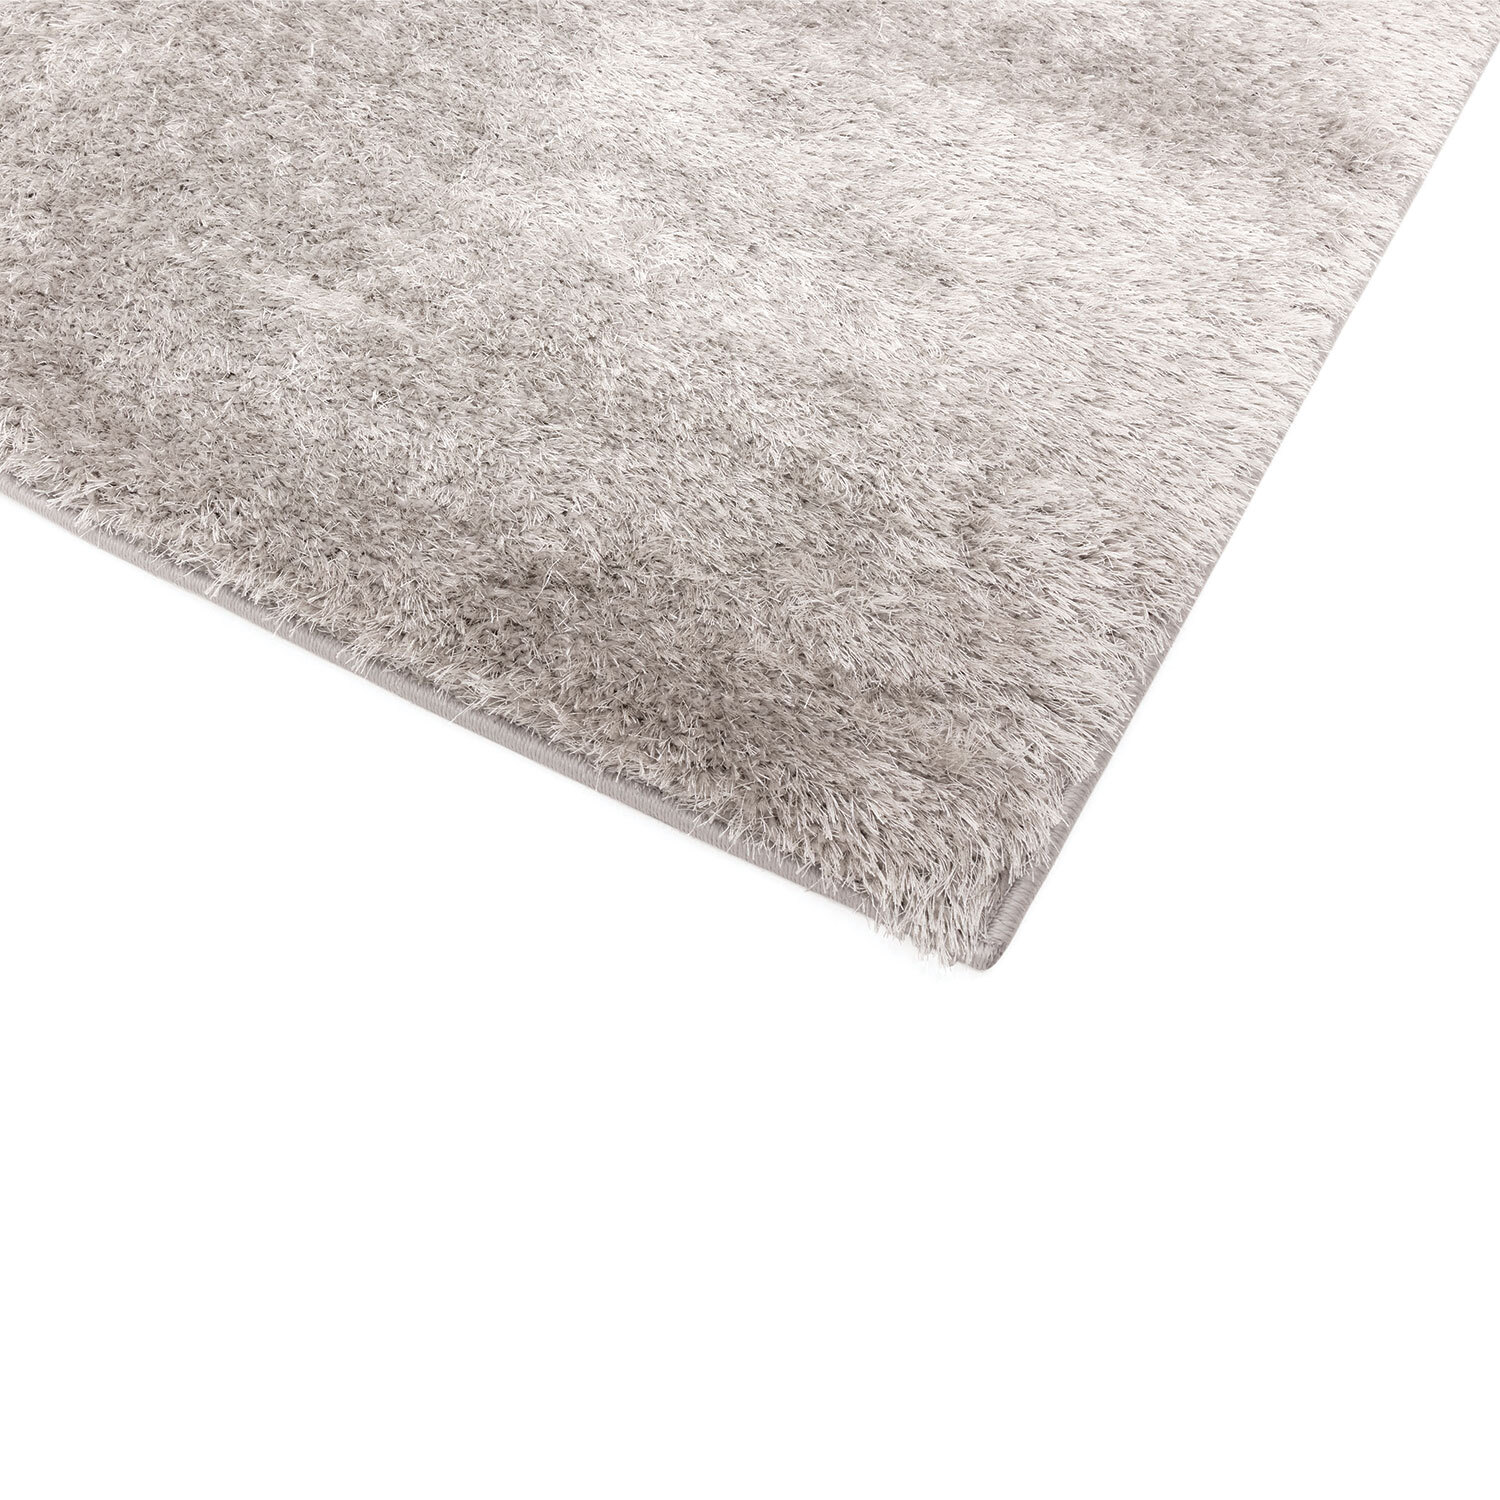 Silver Sumptuous Rug Image 2